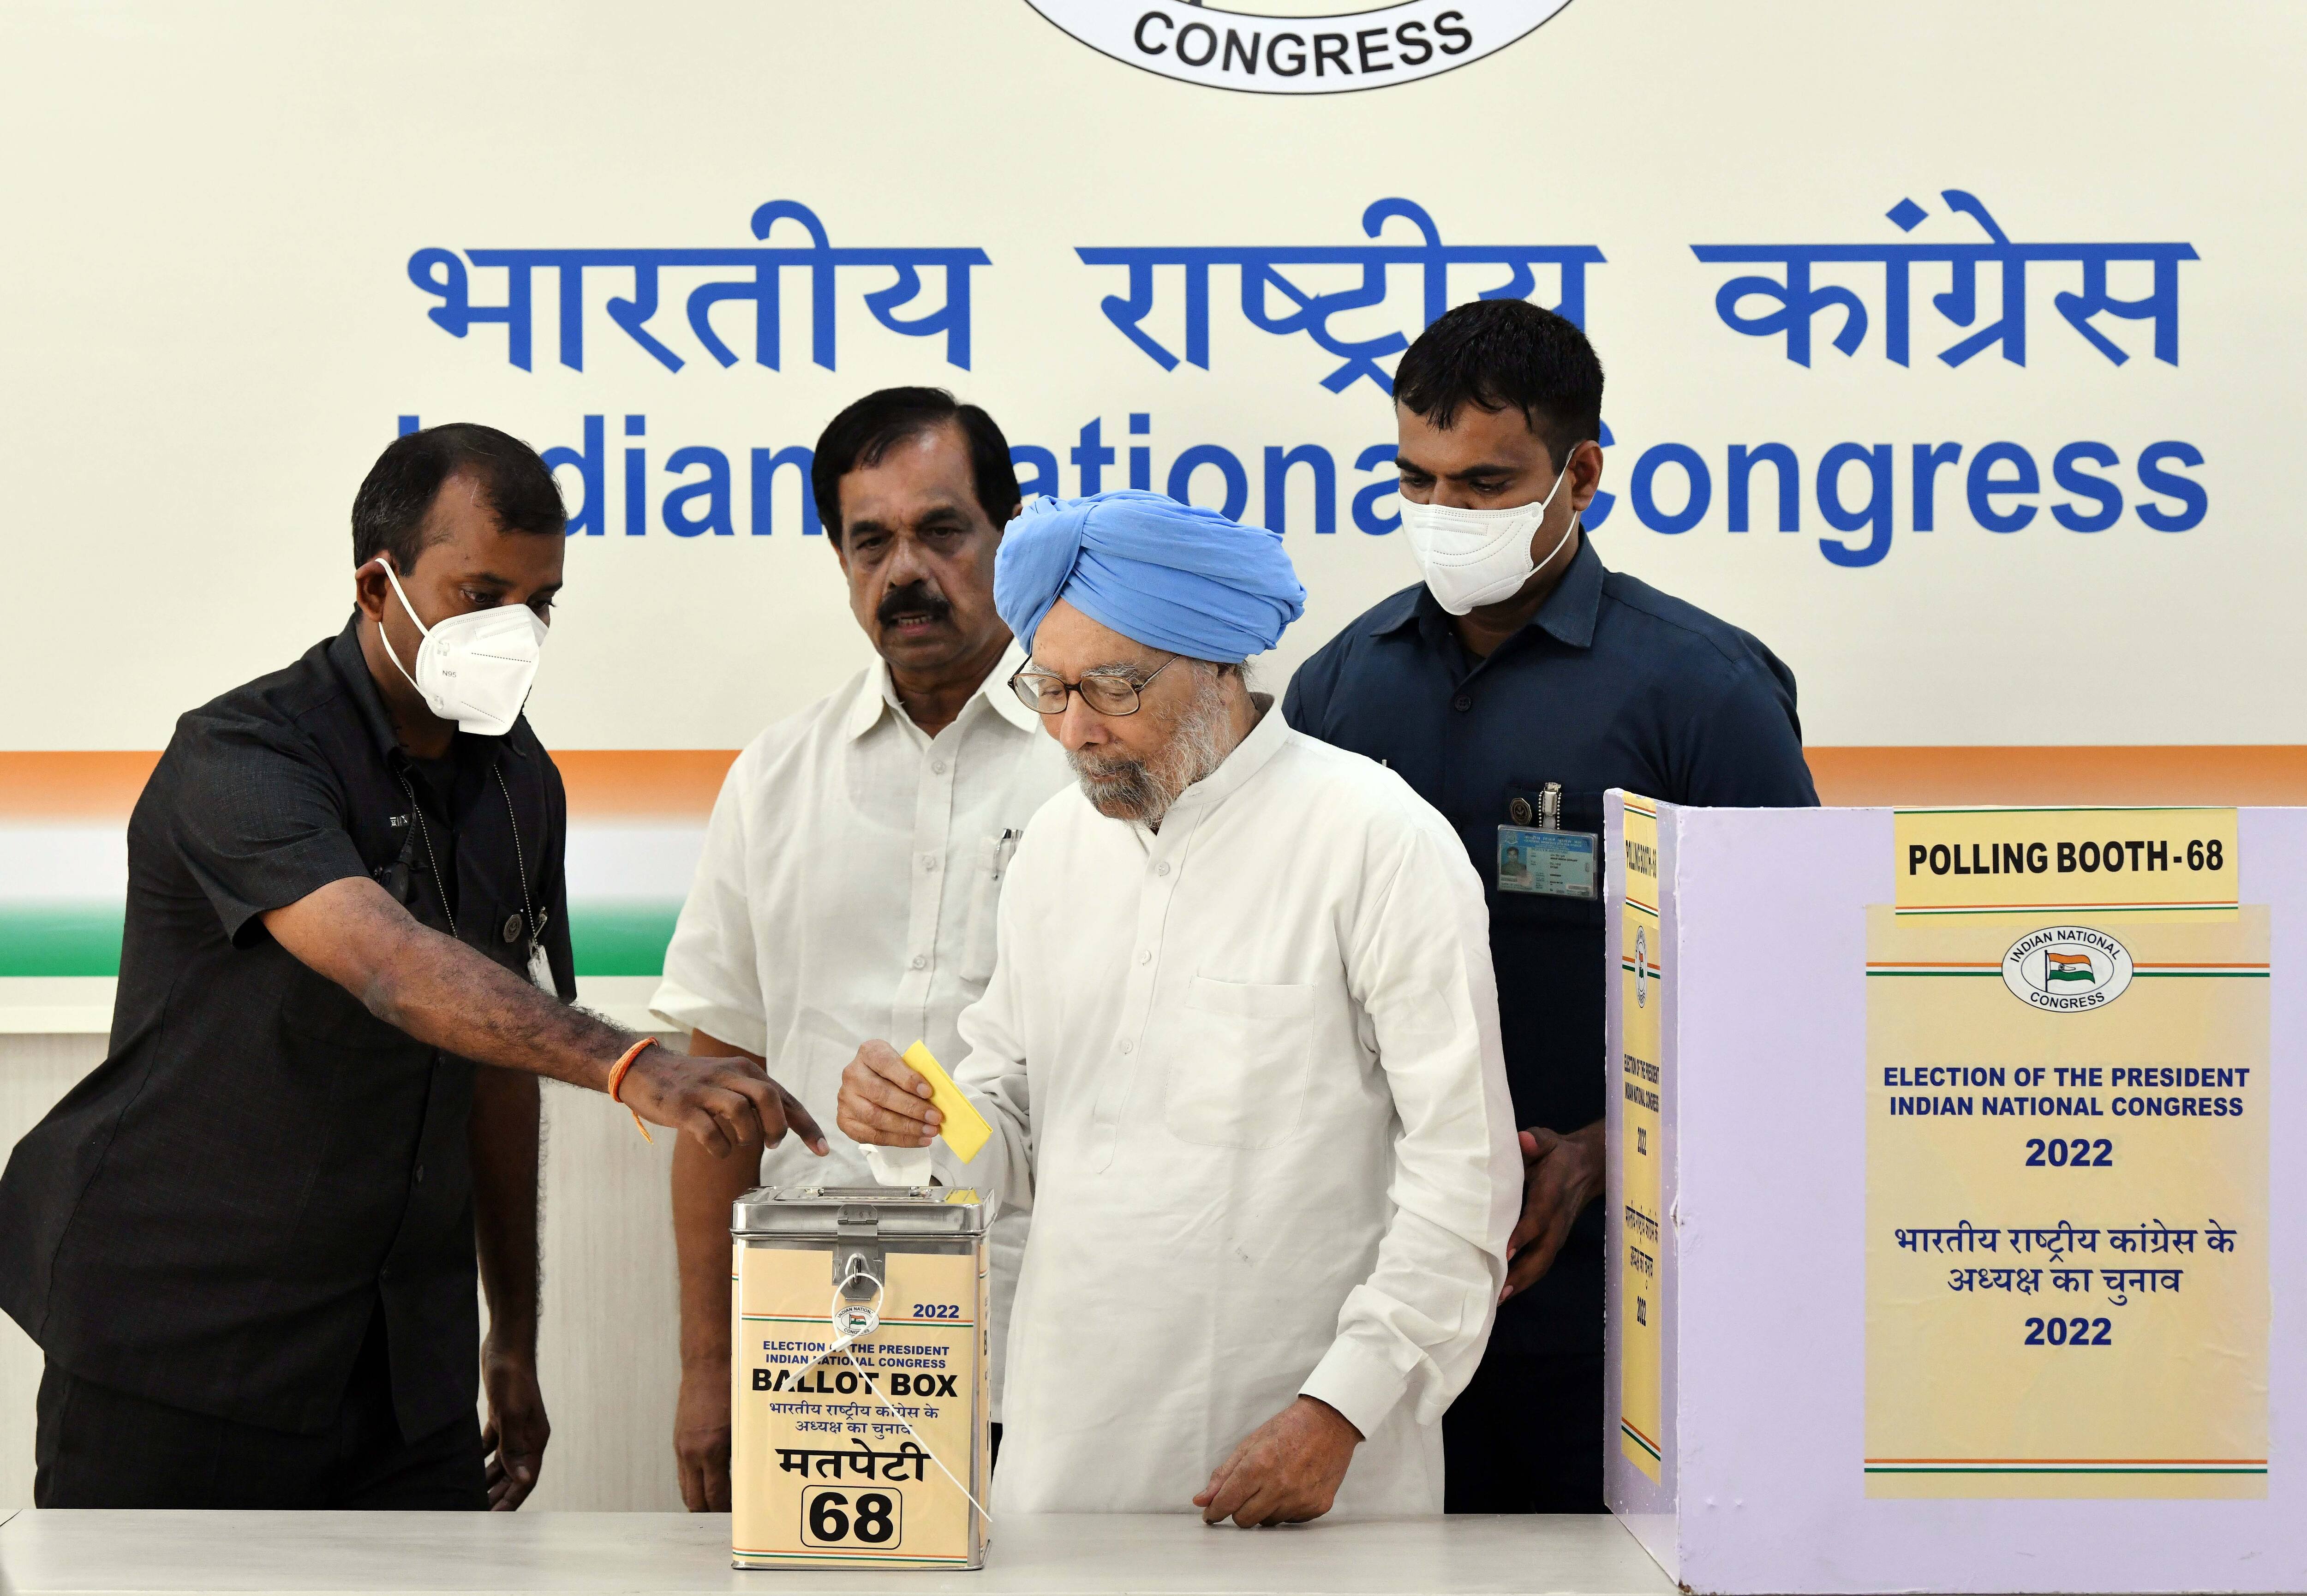 Former PM Manmohan Singh casts his vote for the Congress Presidential Election at AICC headquarters